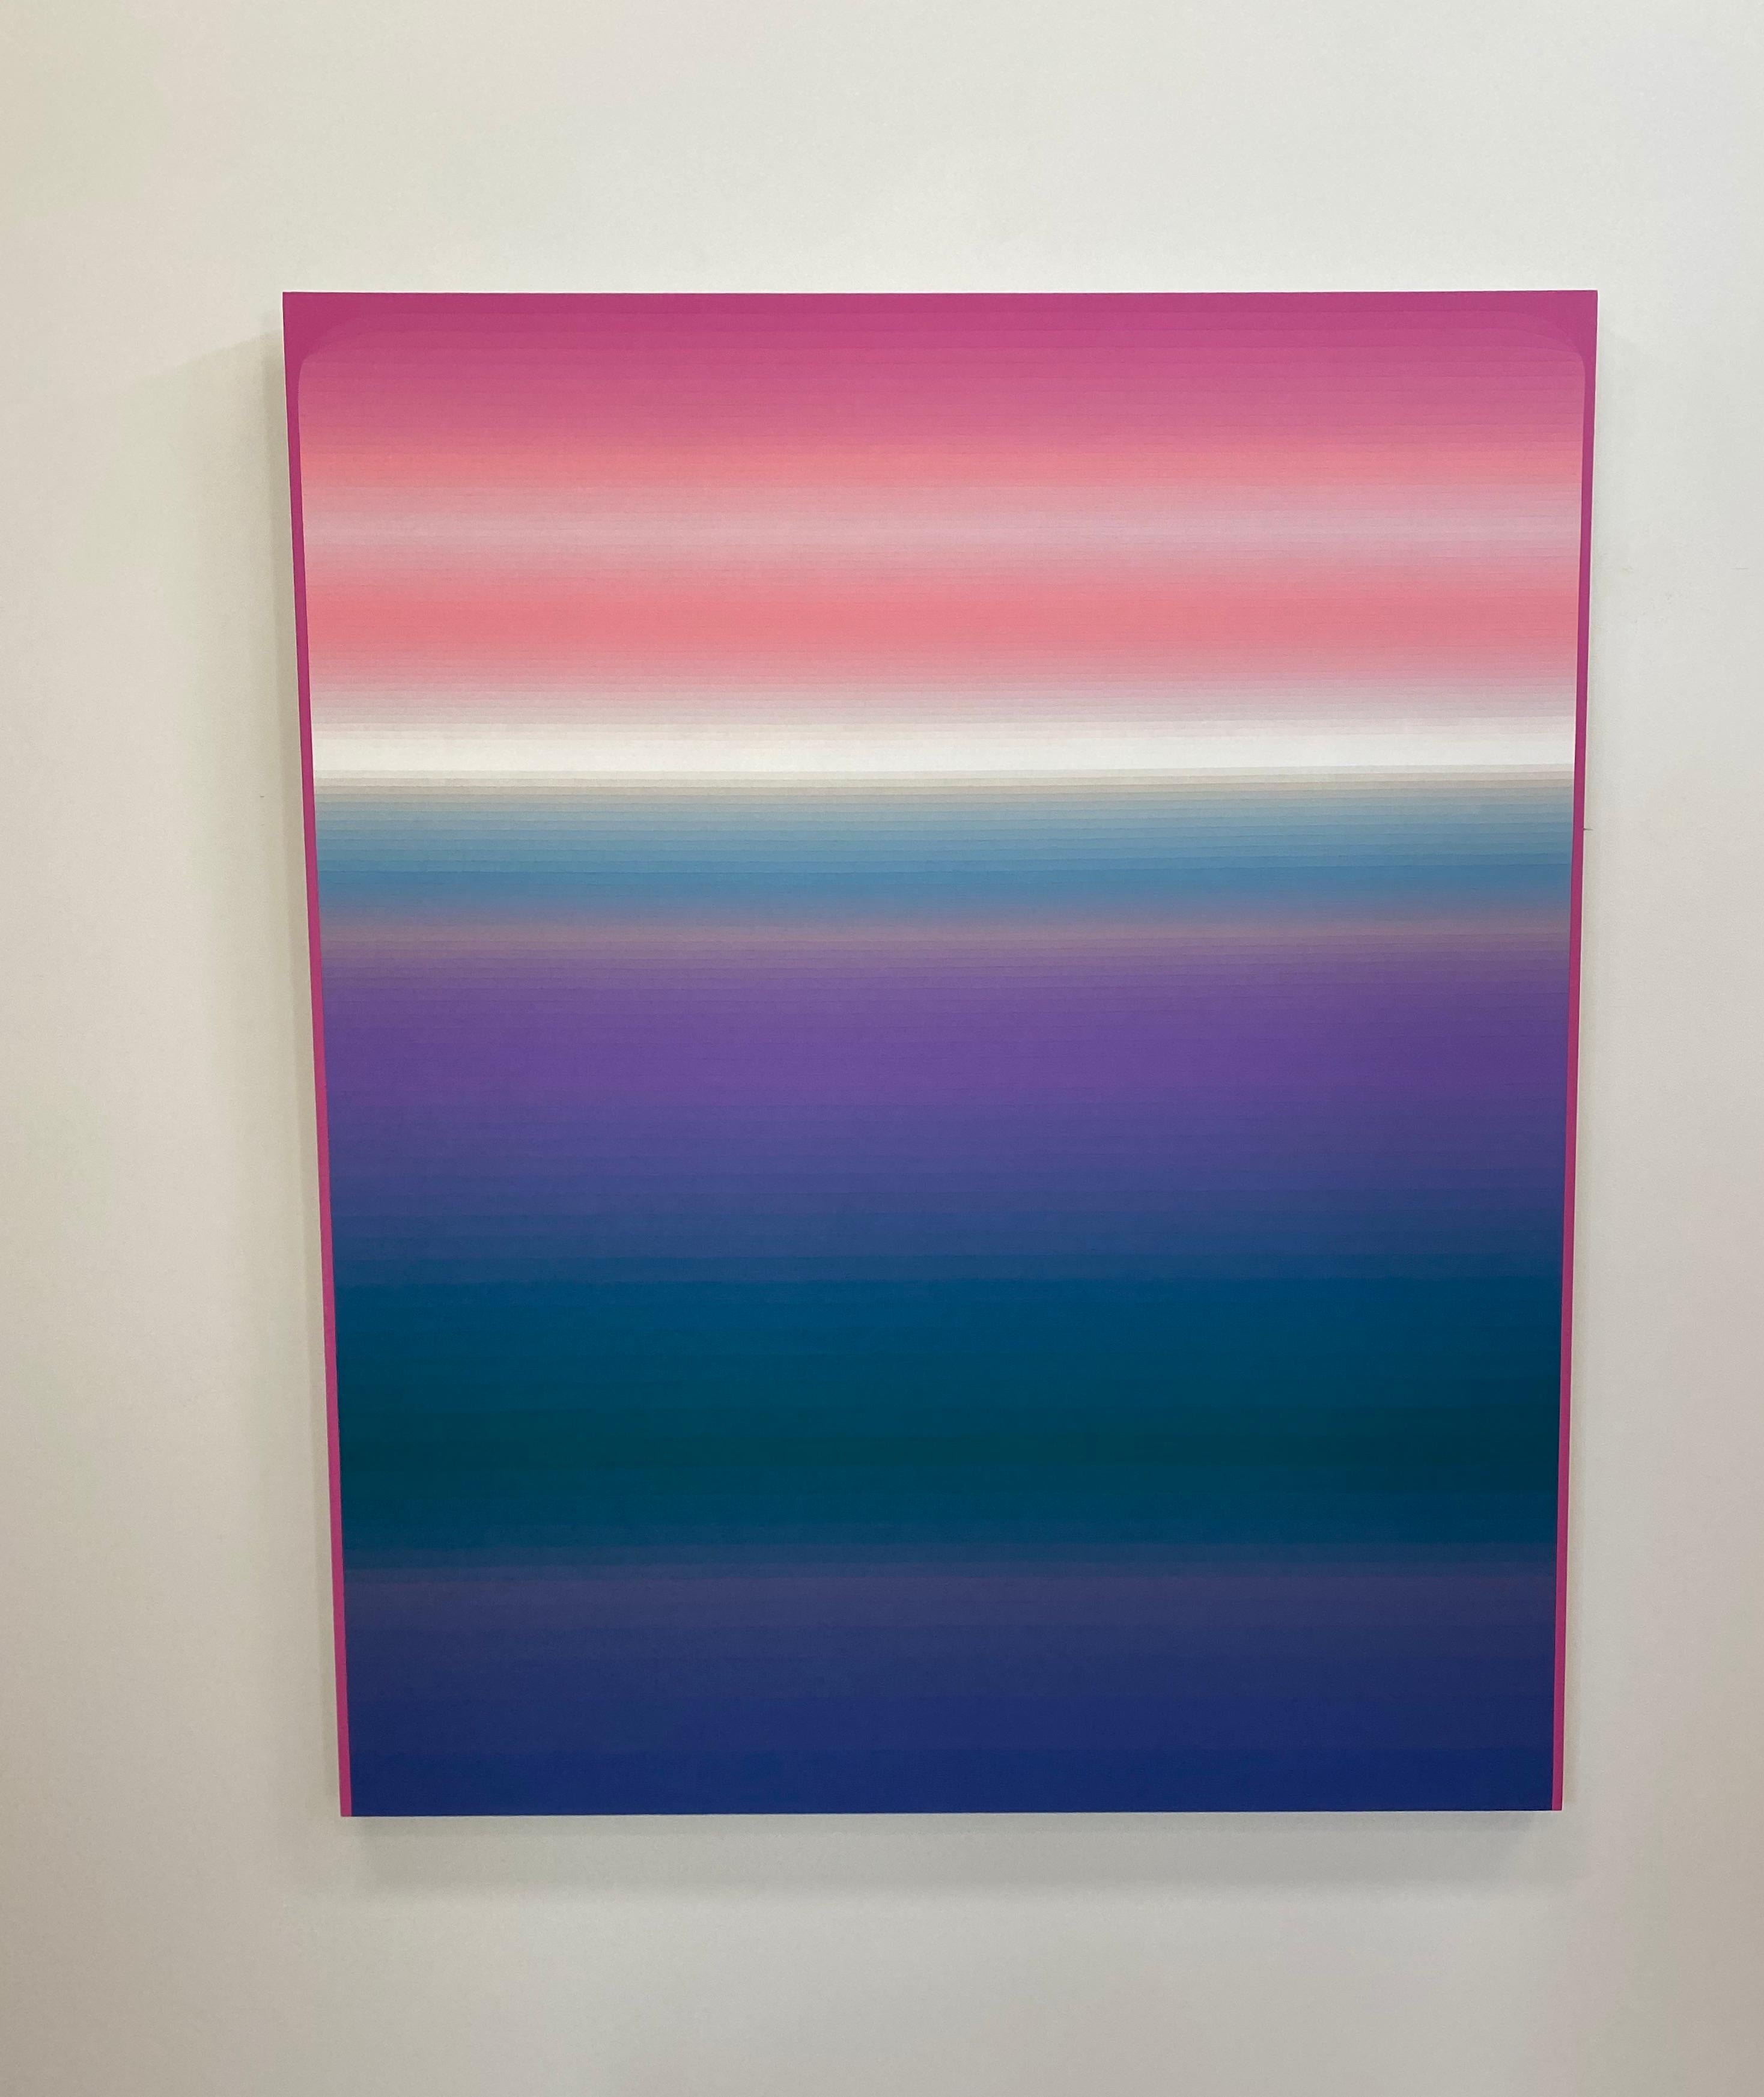 In this large, vertical abstract painting in acrylic on linen, thin horizontal stripes of color in gradient shades transition from bright shades of deep purple at the bottom to dark indigo, light purple in the center, blue-gray, white and shades of